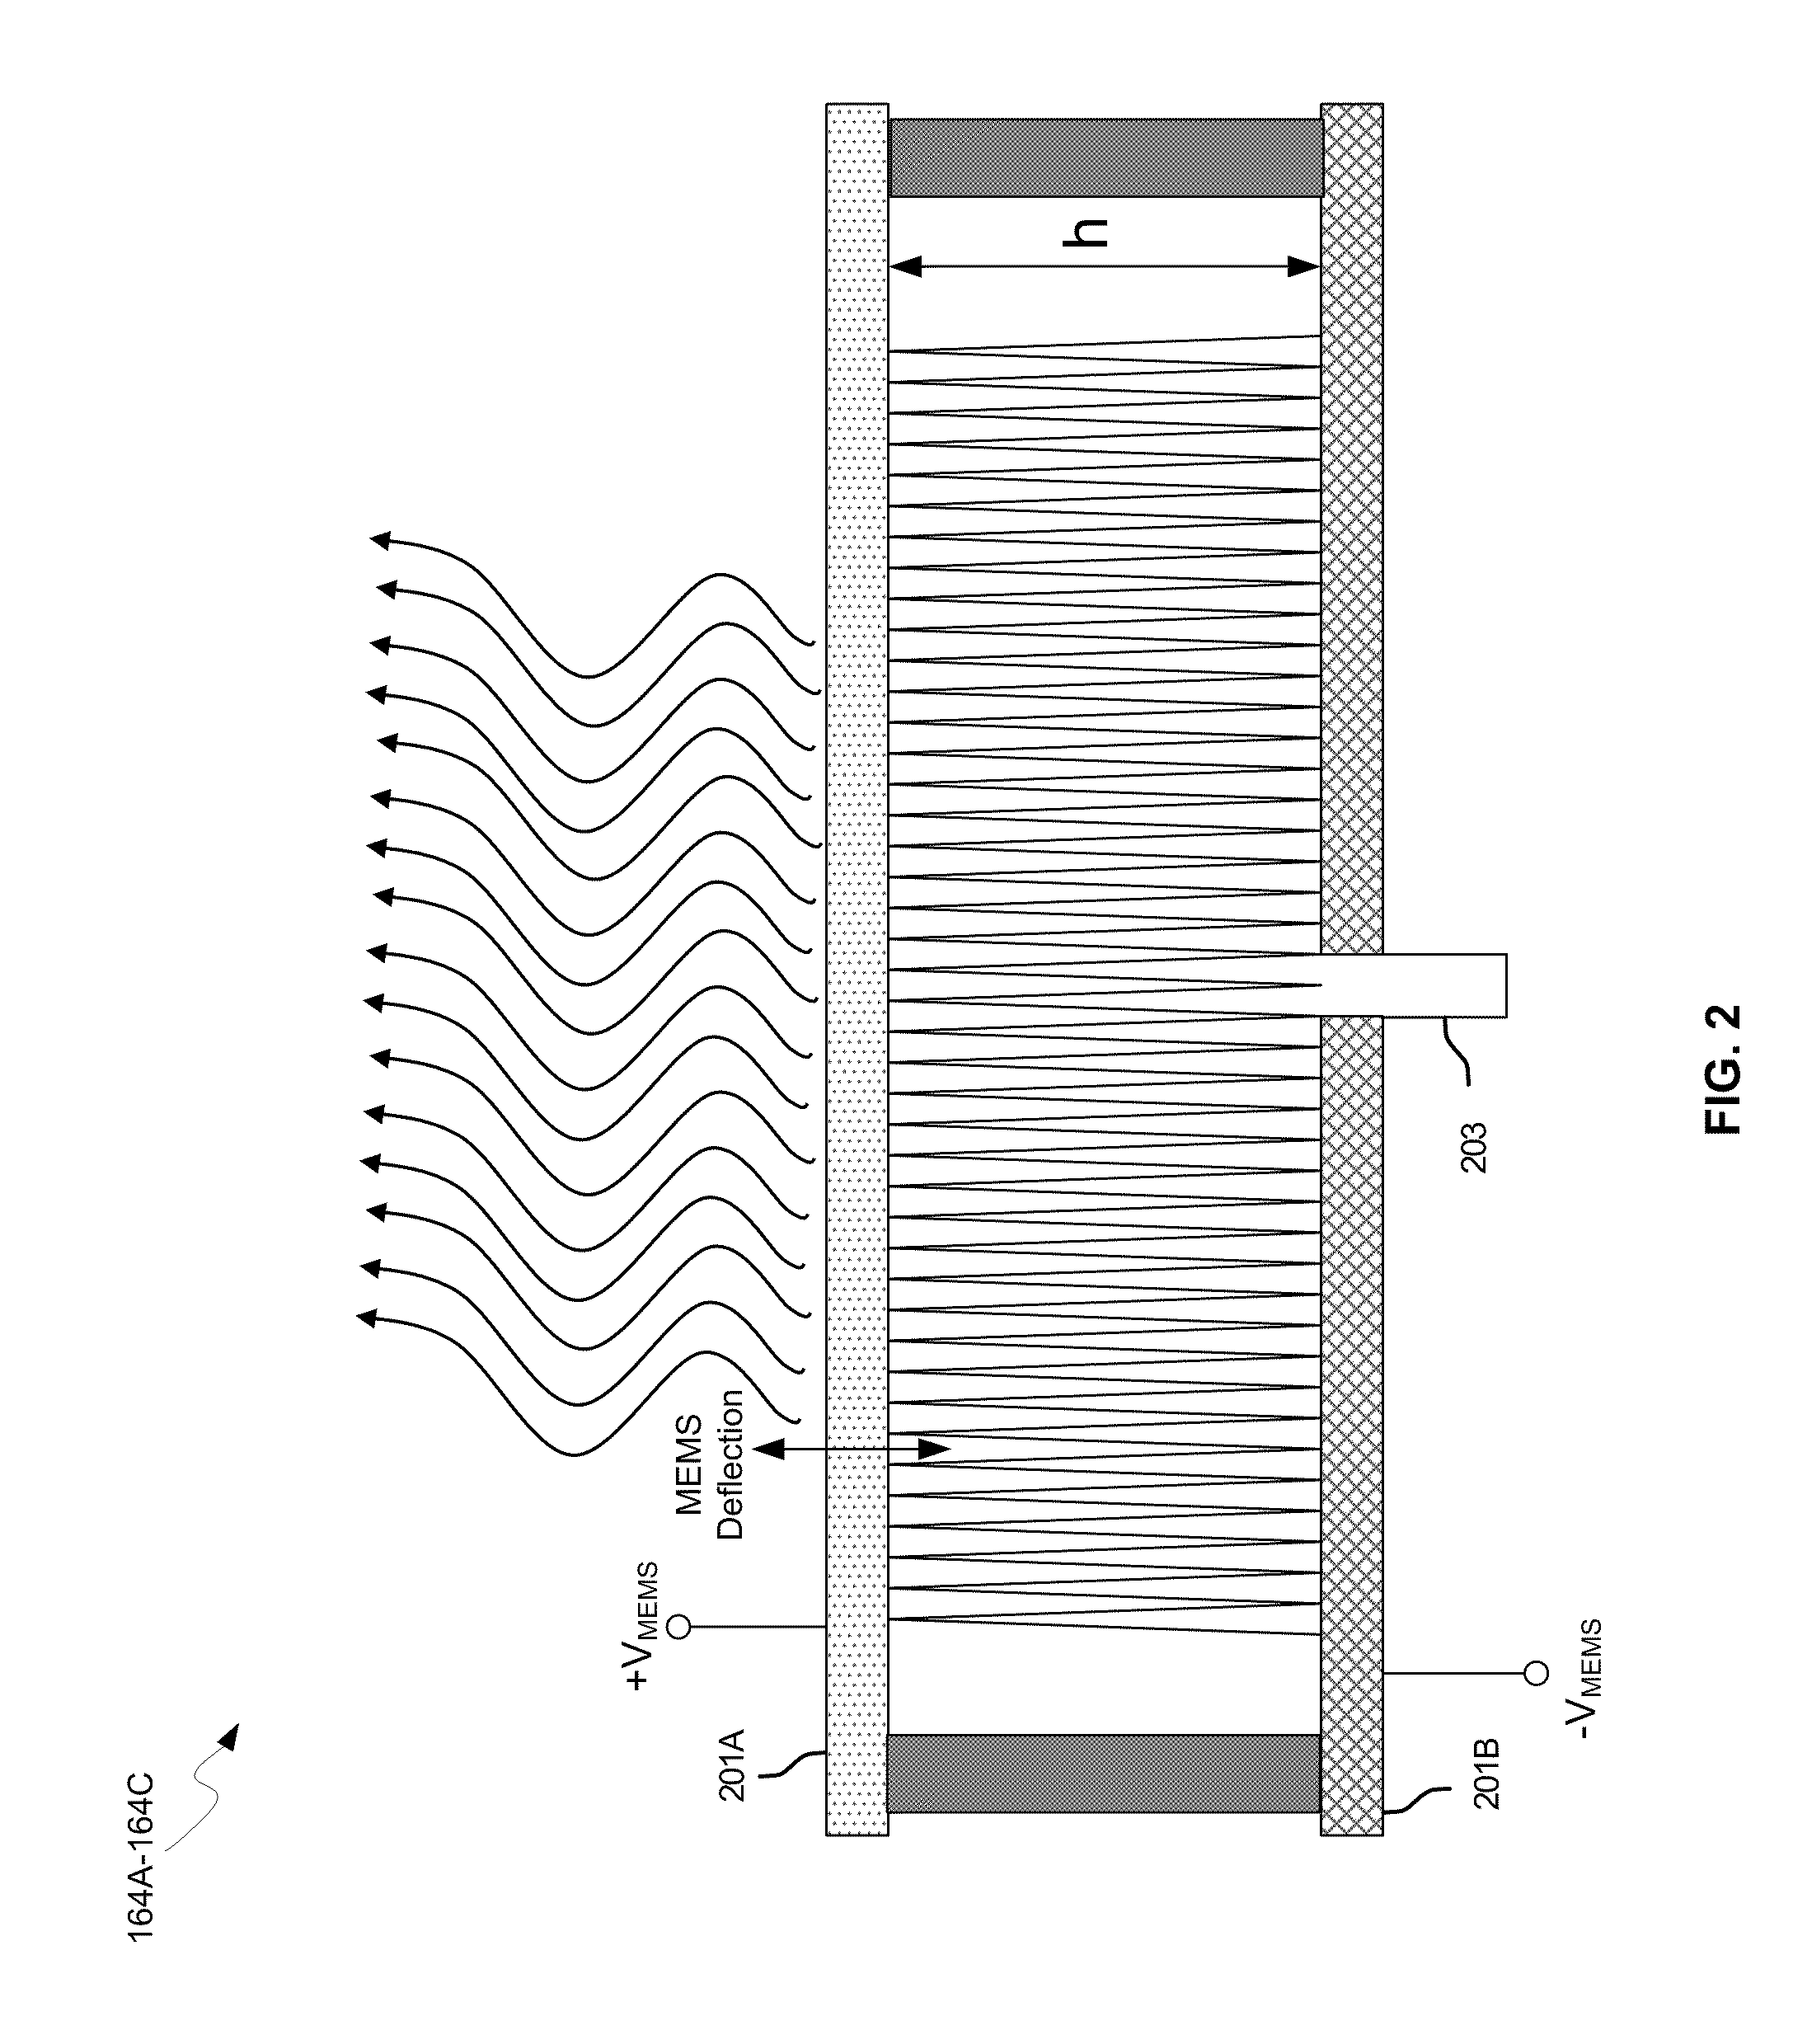 Method and system for a smart antenna utilizing leaky wave antennas